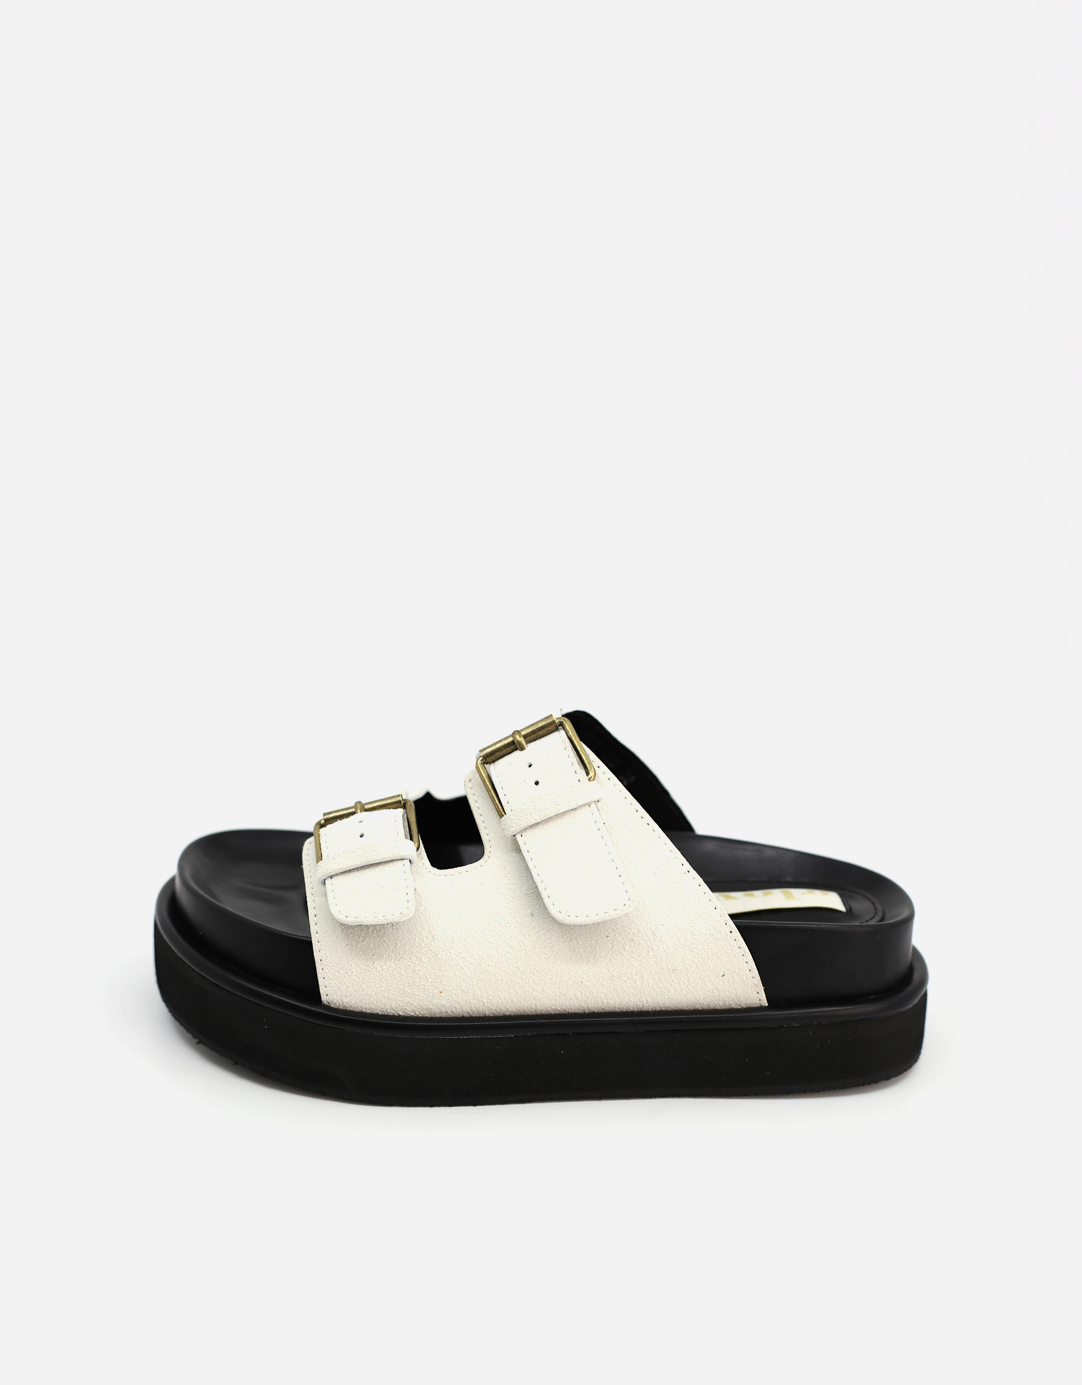 IVORY TWO BUCKLE SLIPPER